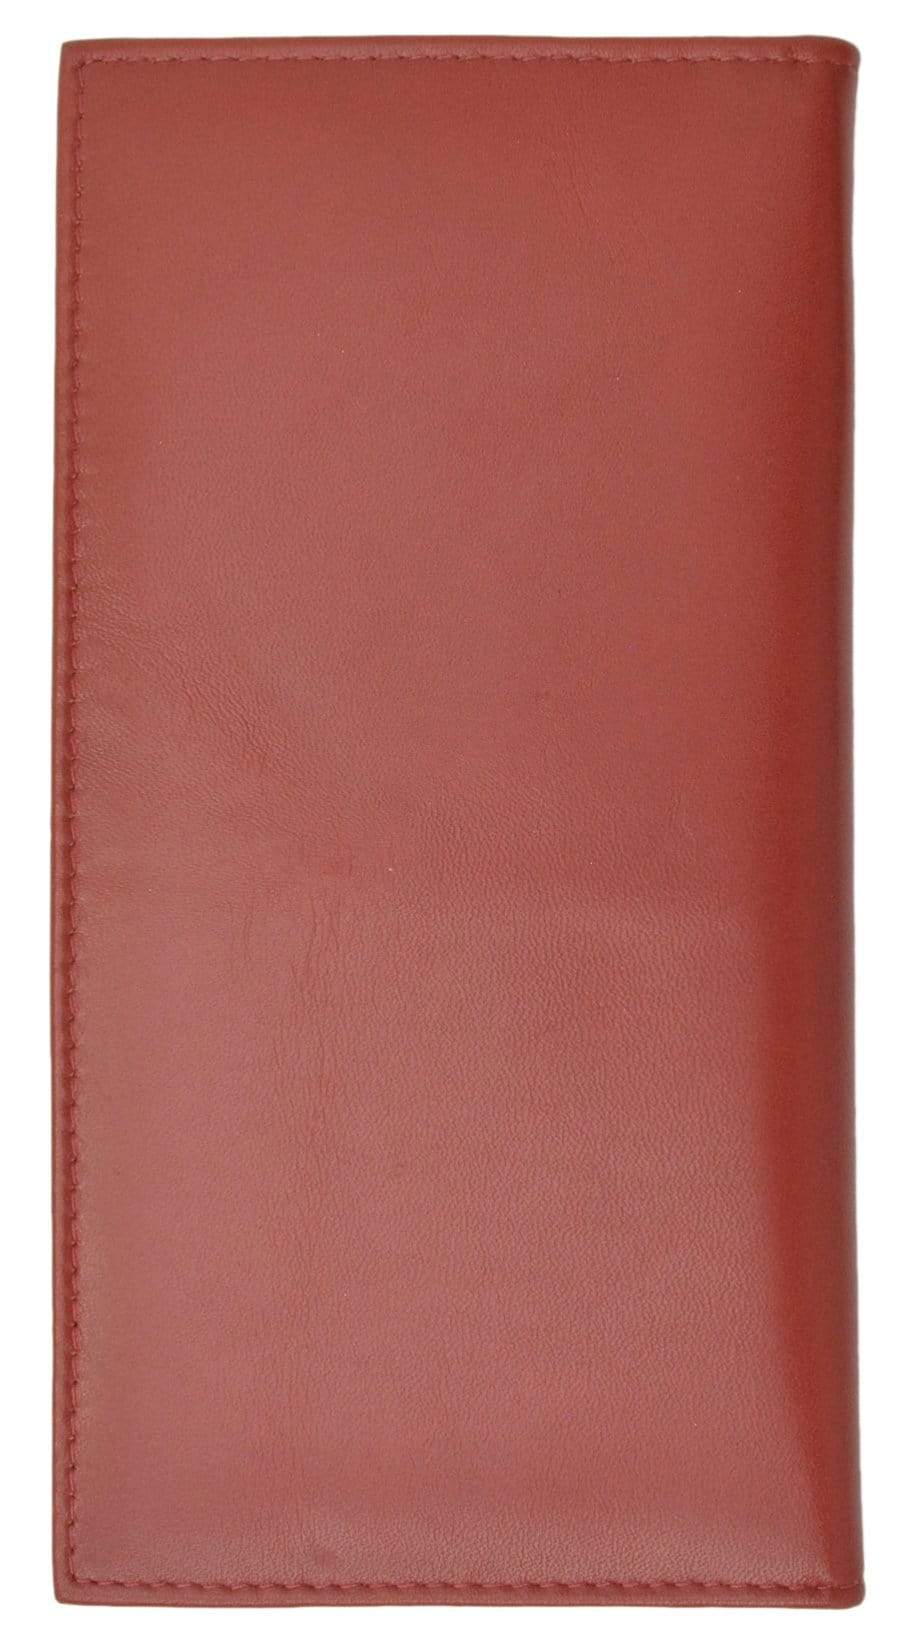 Brand New Hand Crafted Premium Soft Leather Simple Checkbook Cover P156-menswallet